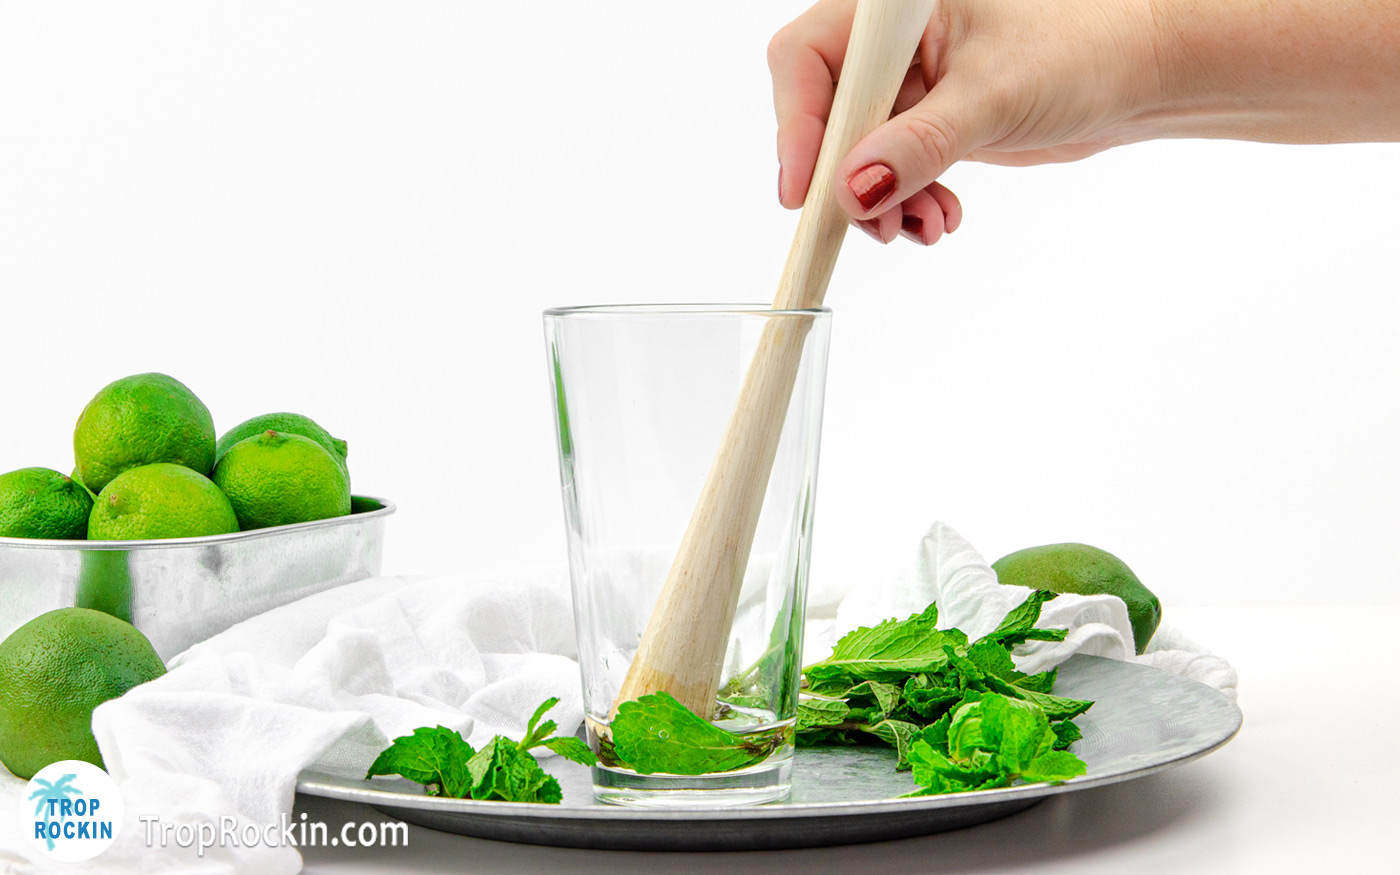 Using a muddler to bruise the mint leaves in the bottom of the glass.